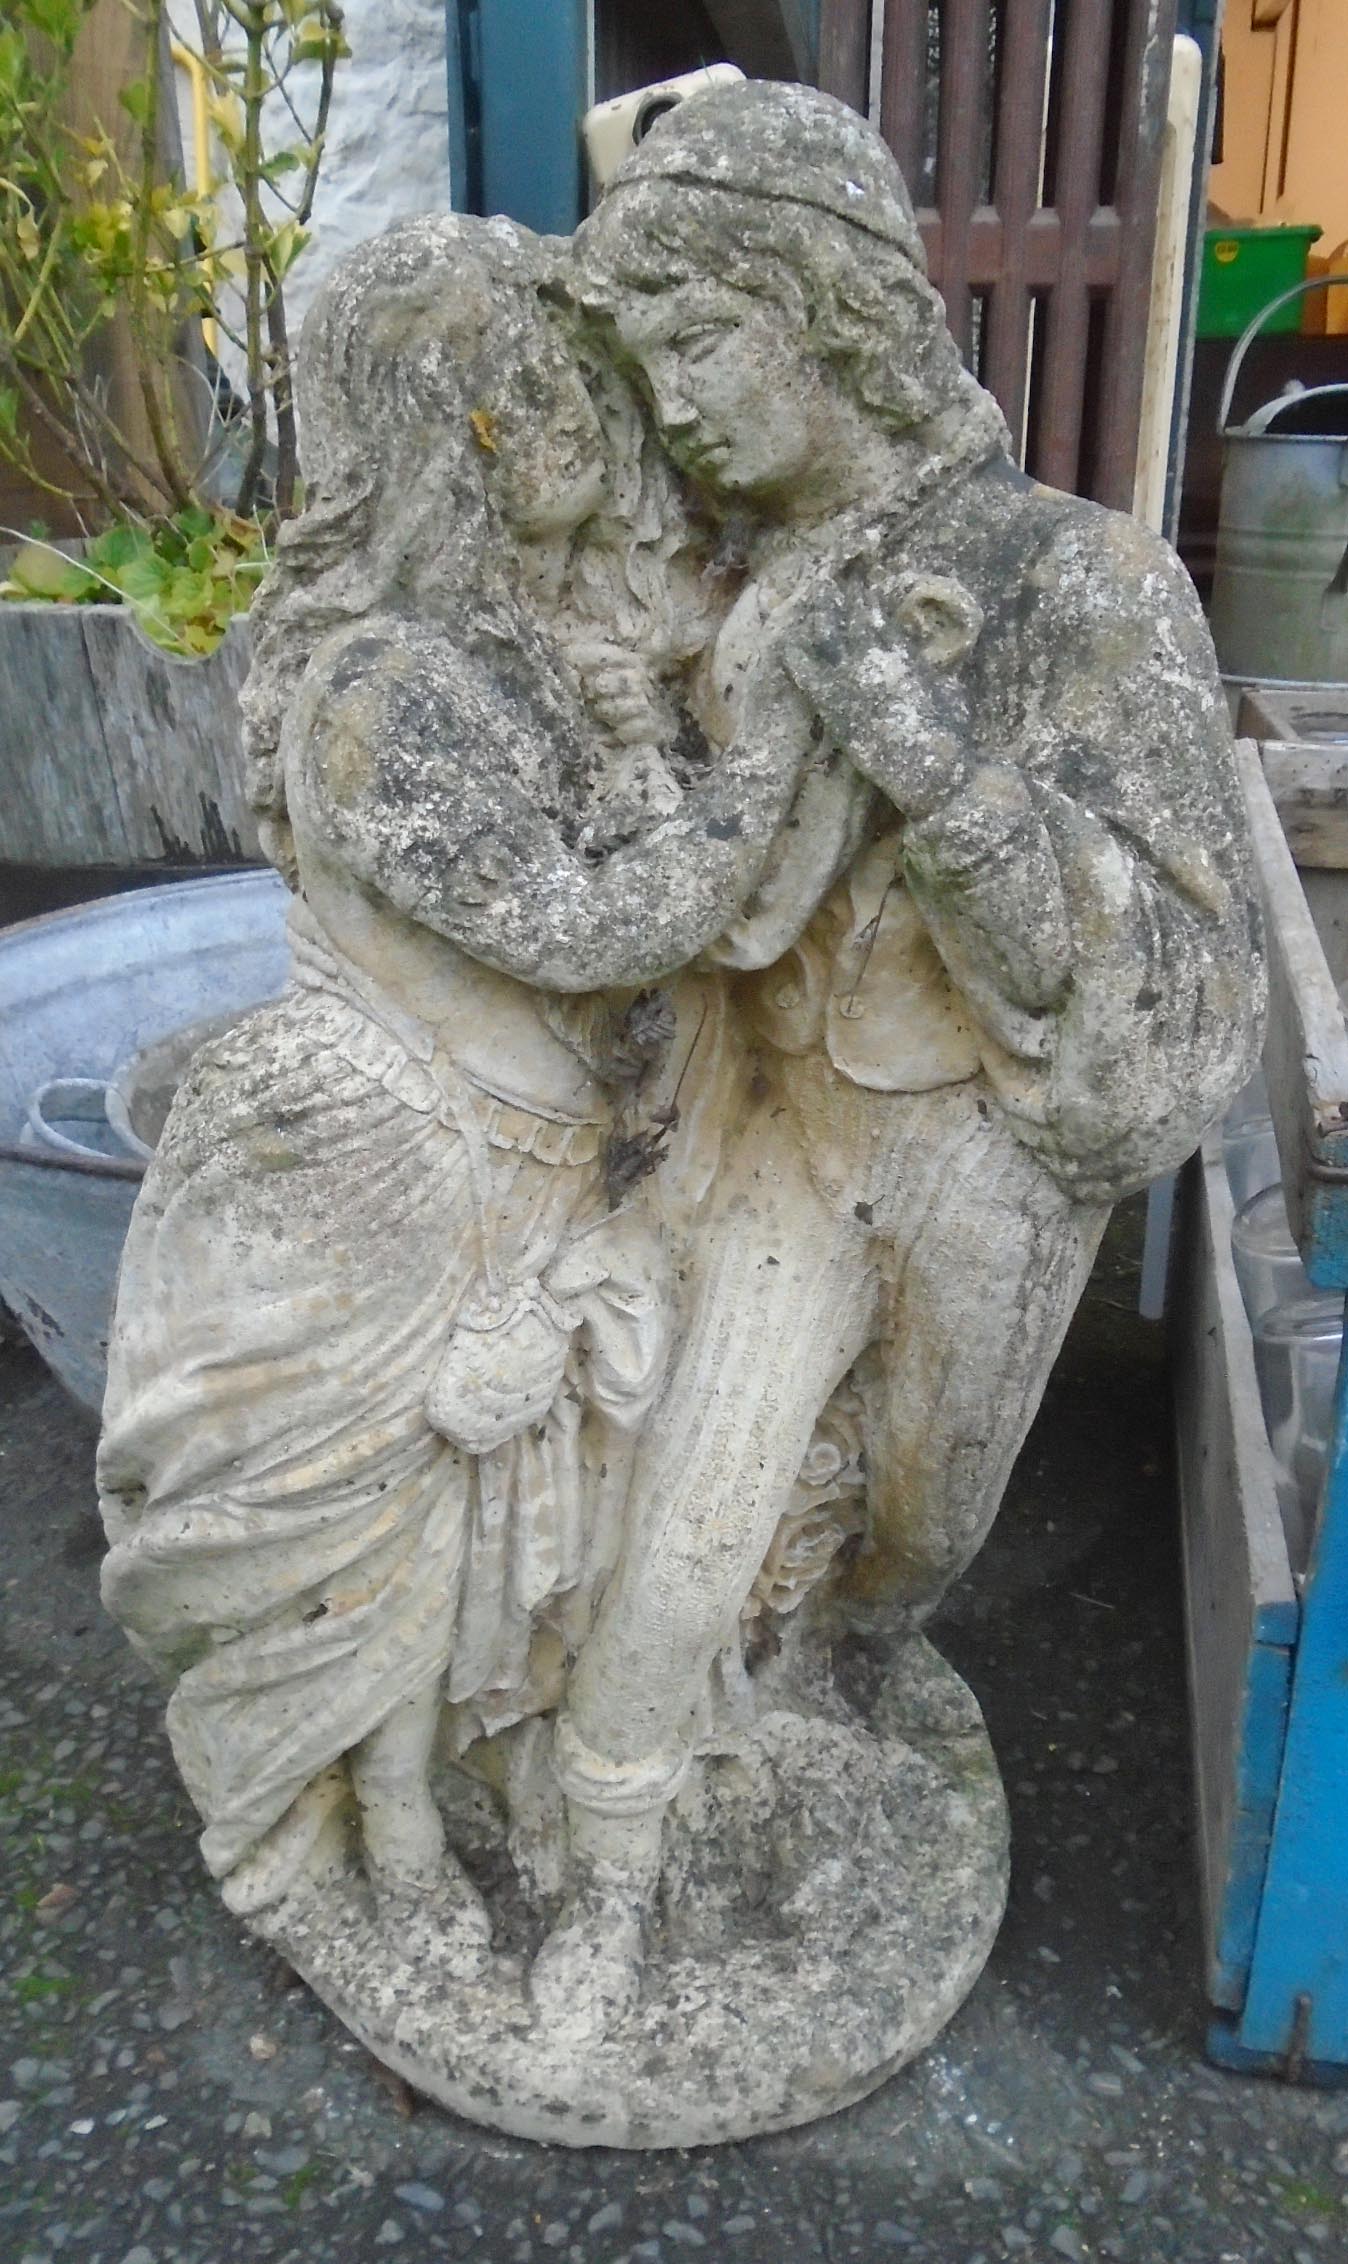 A 26" concrete garden statue in the form of a courting couple